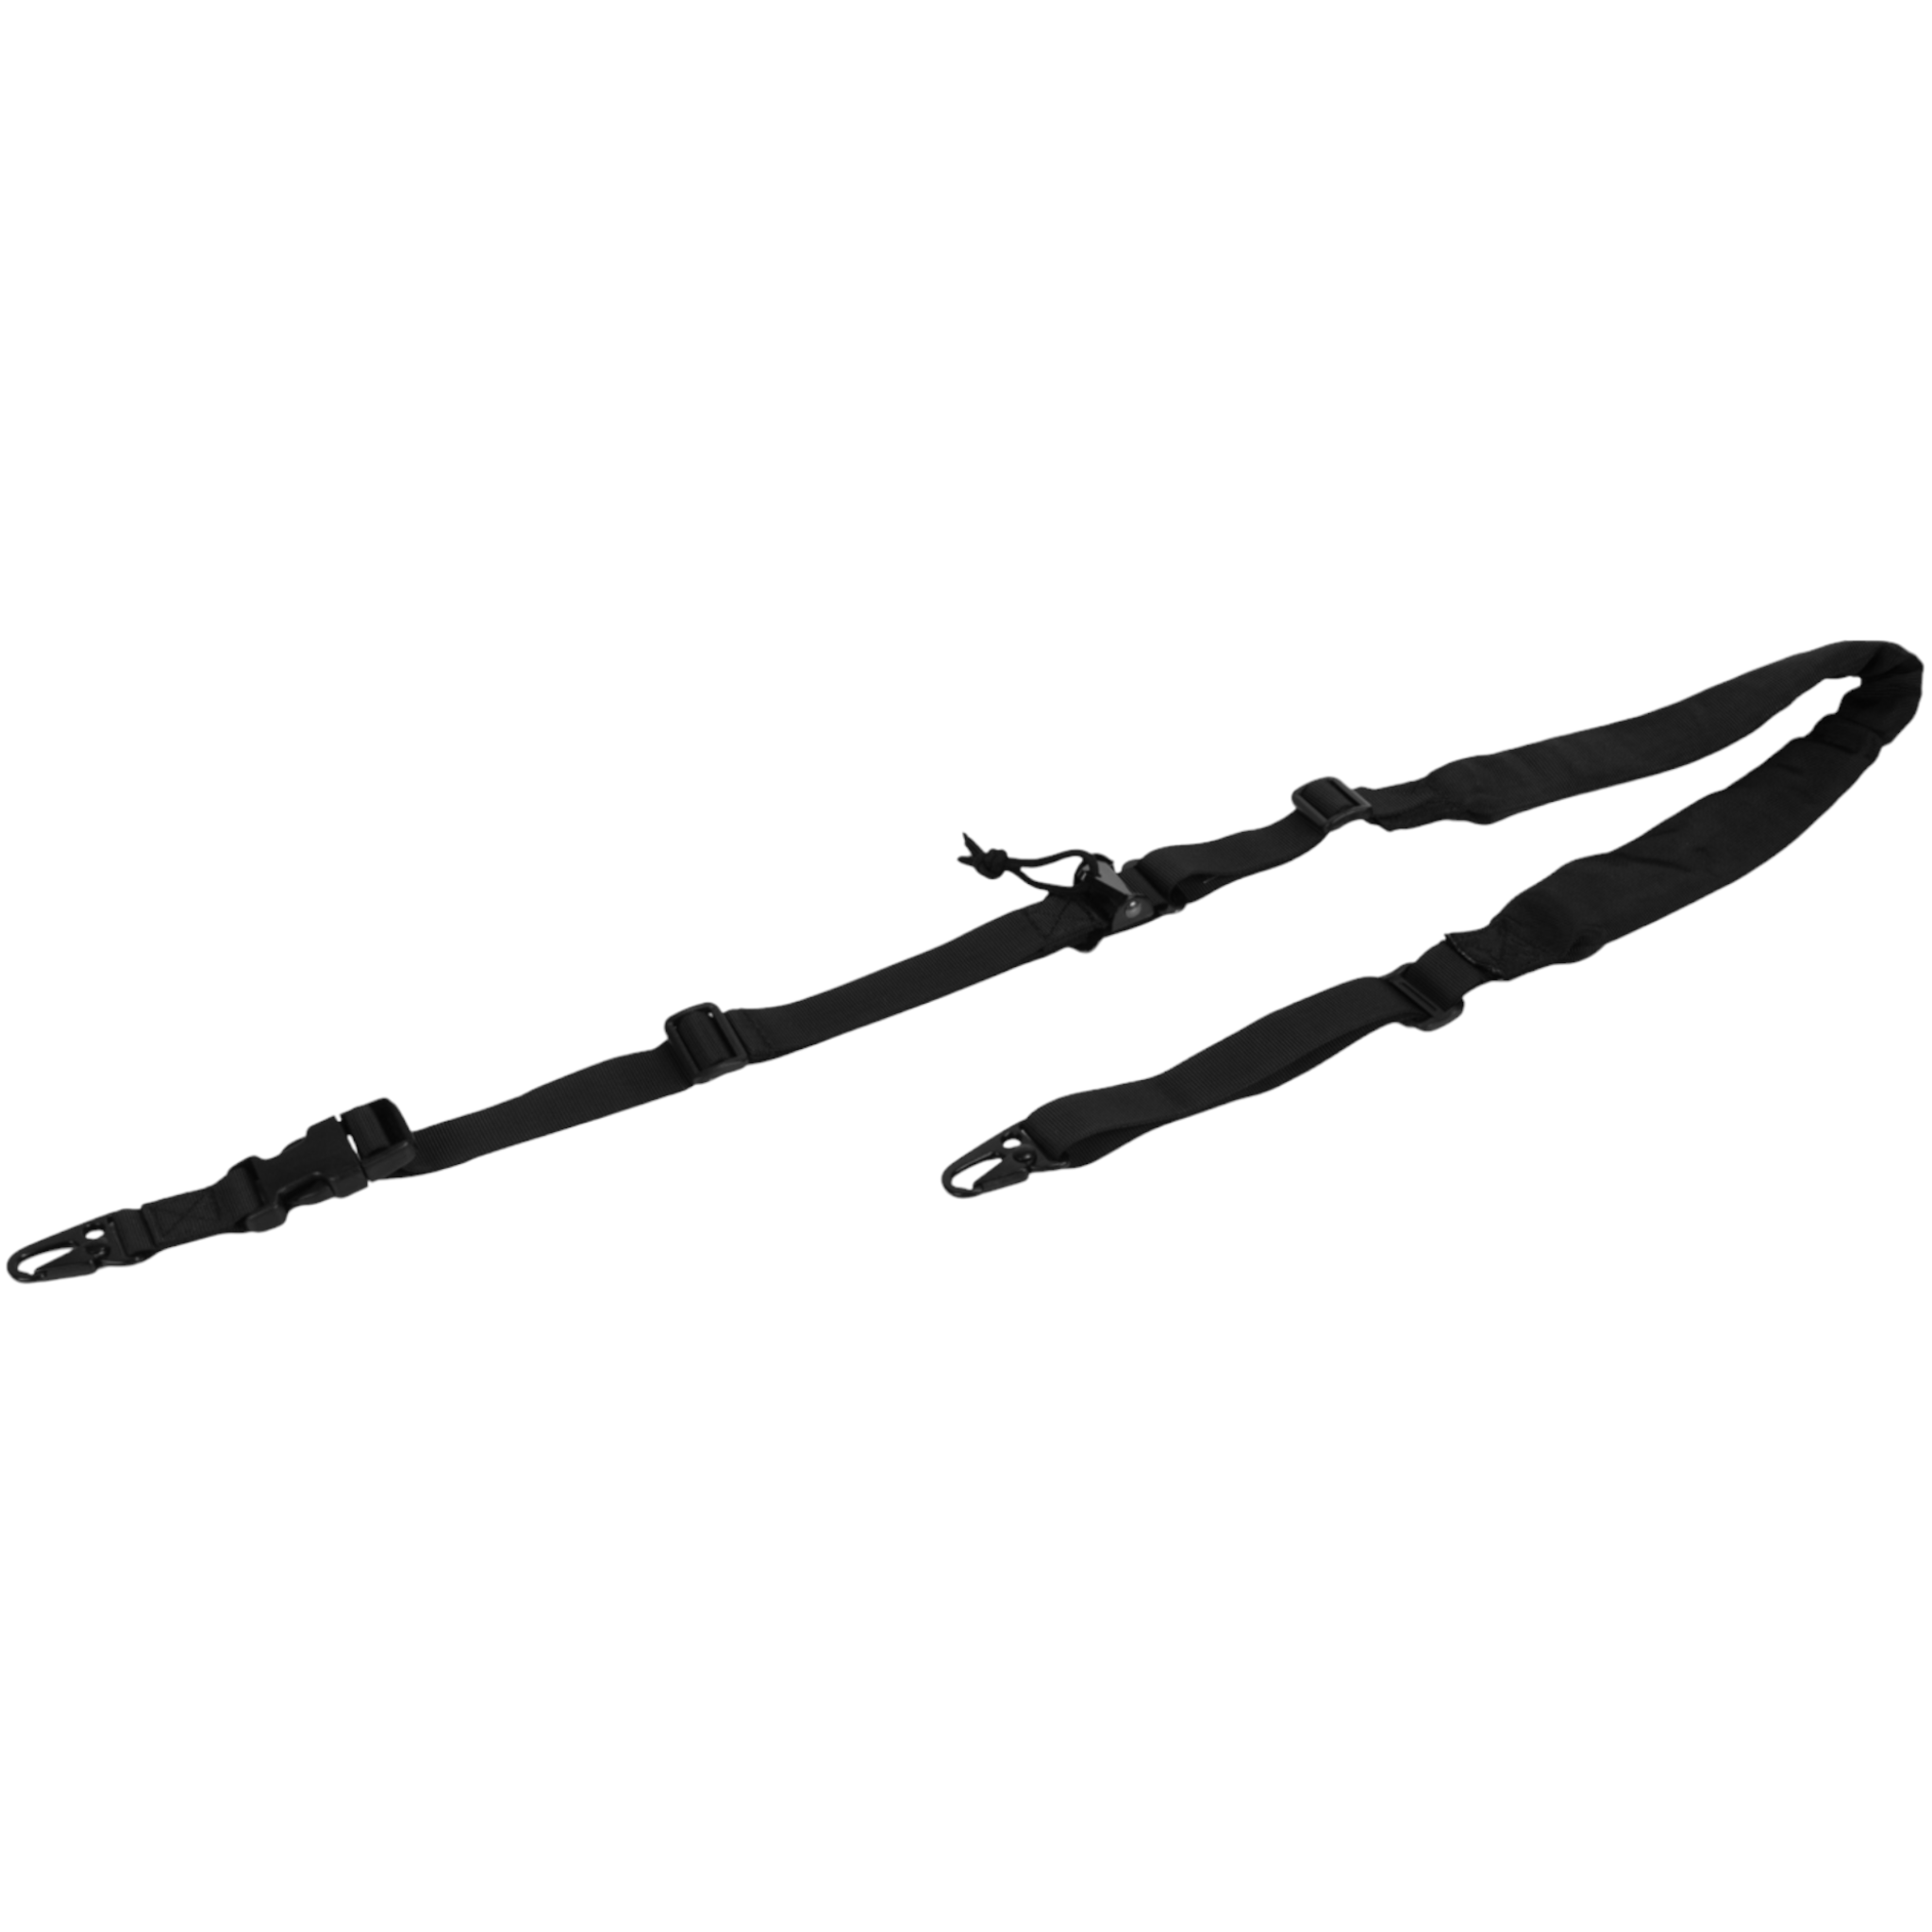 2-Point Padded Airsoft Rifle Sling